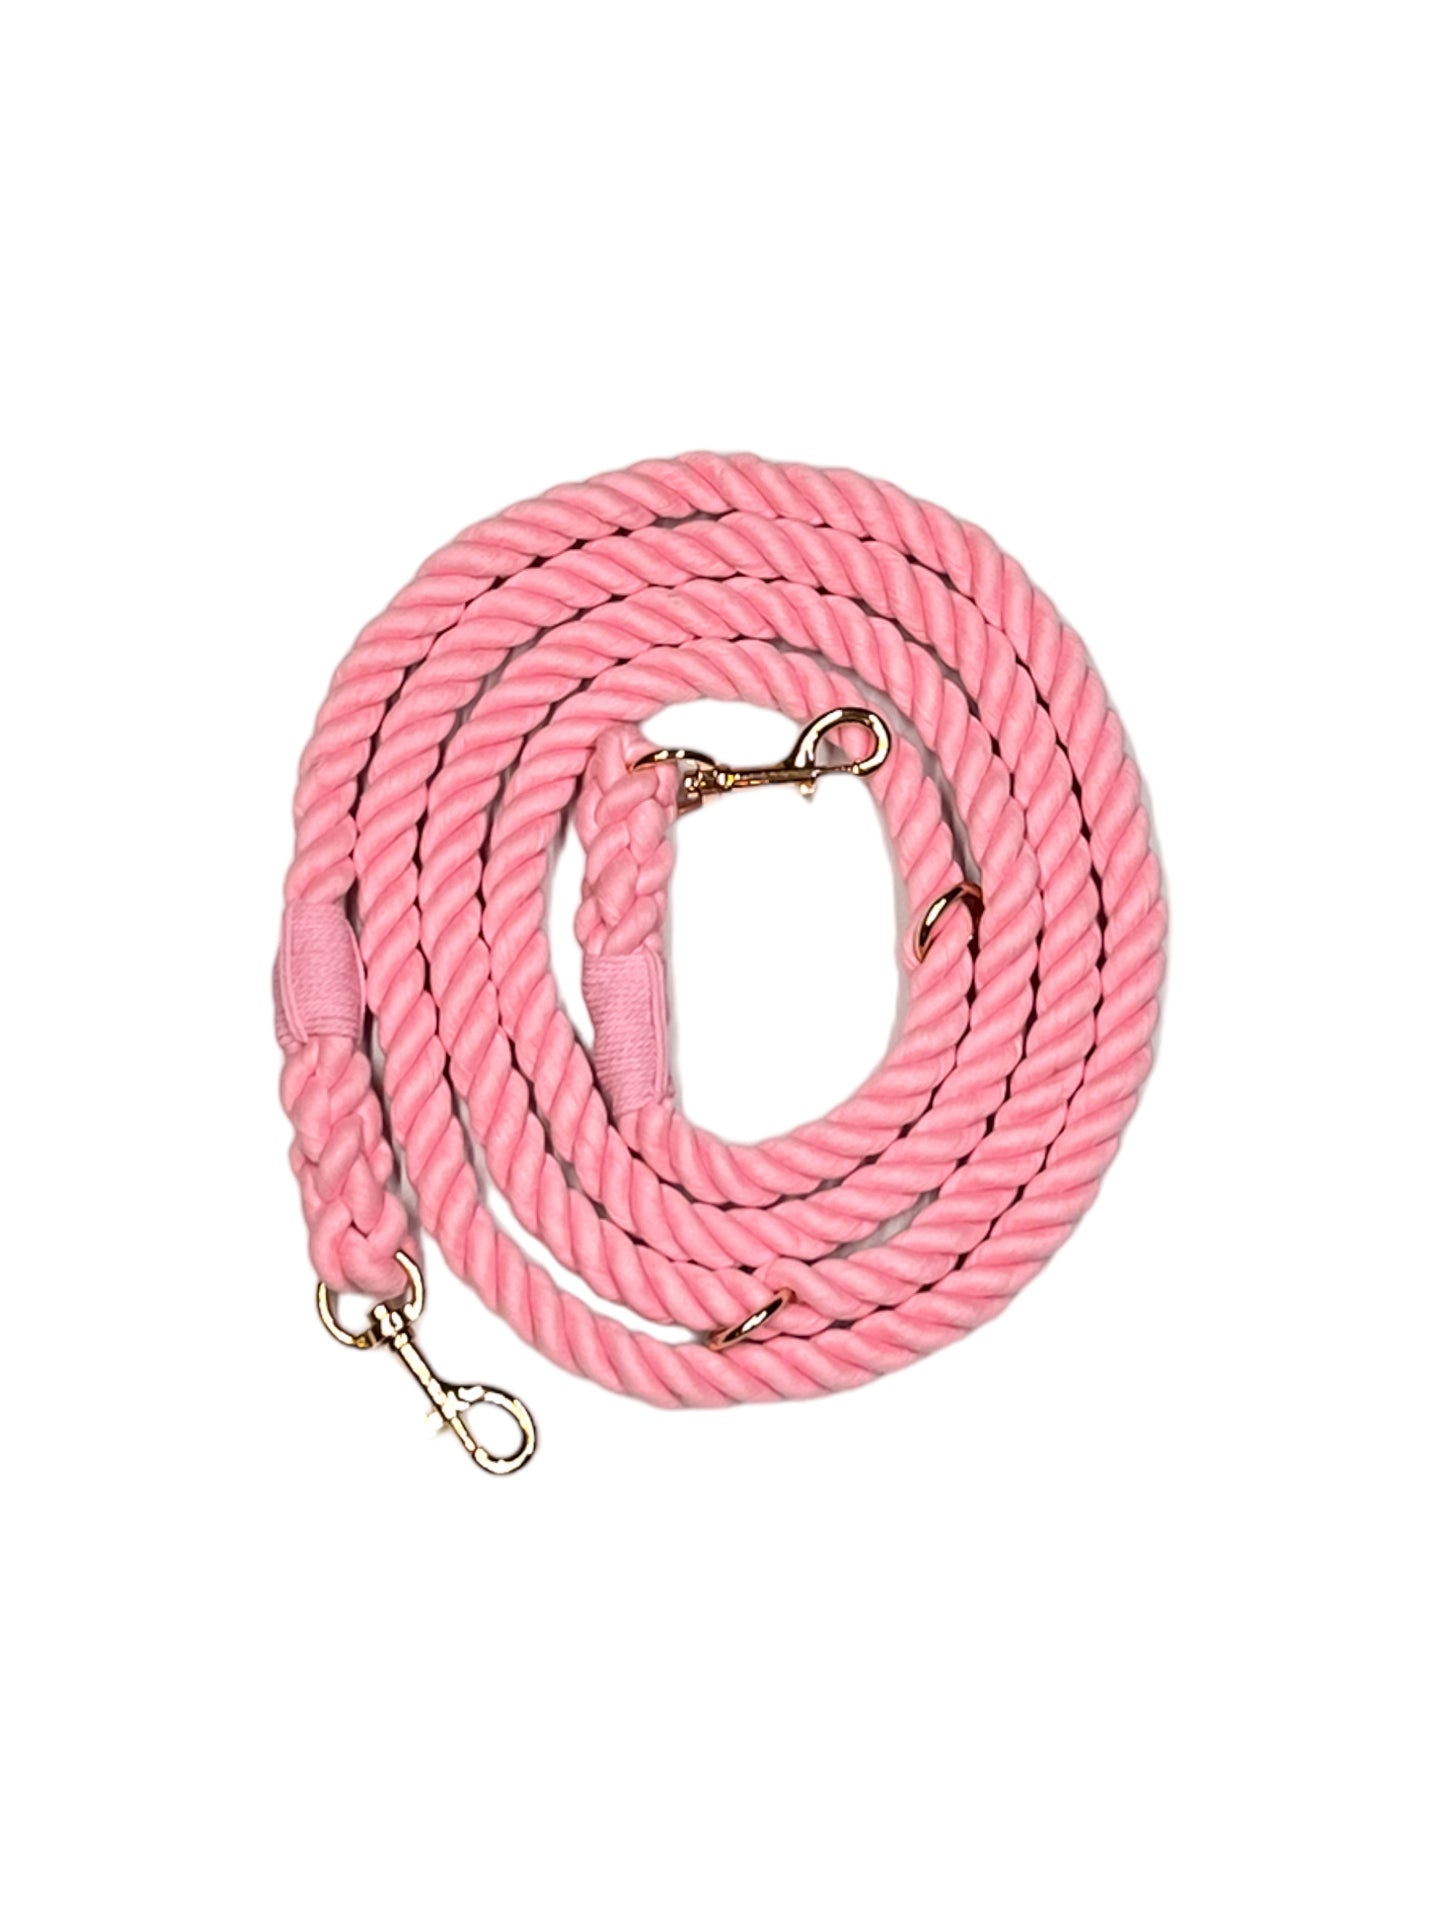 Hands Free Rope Leash